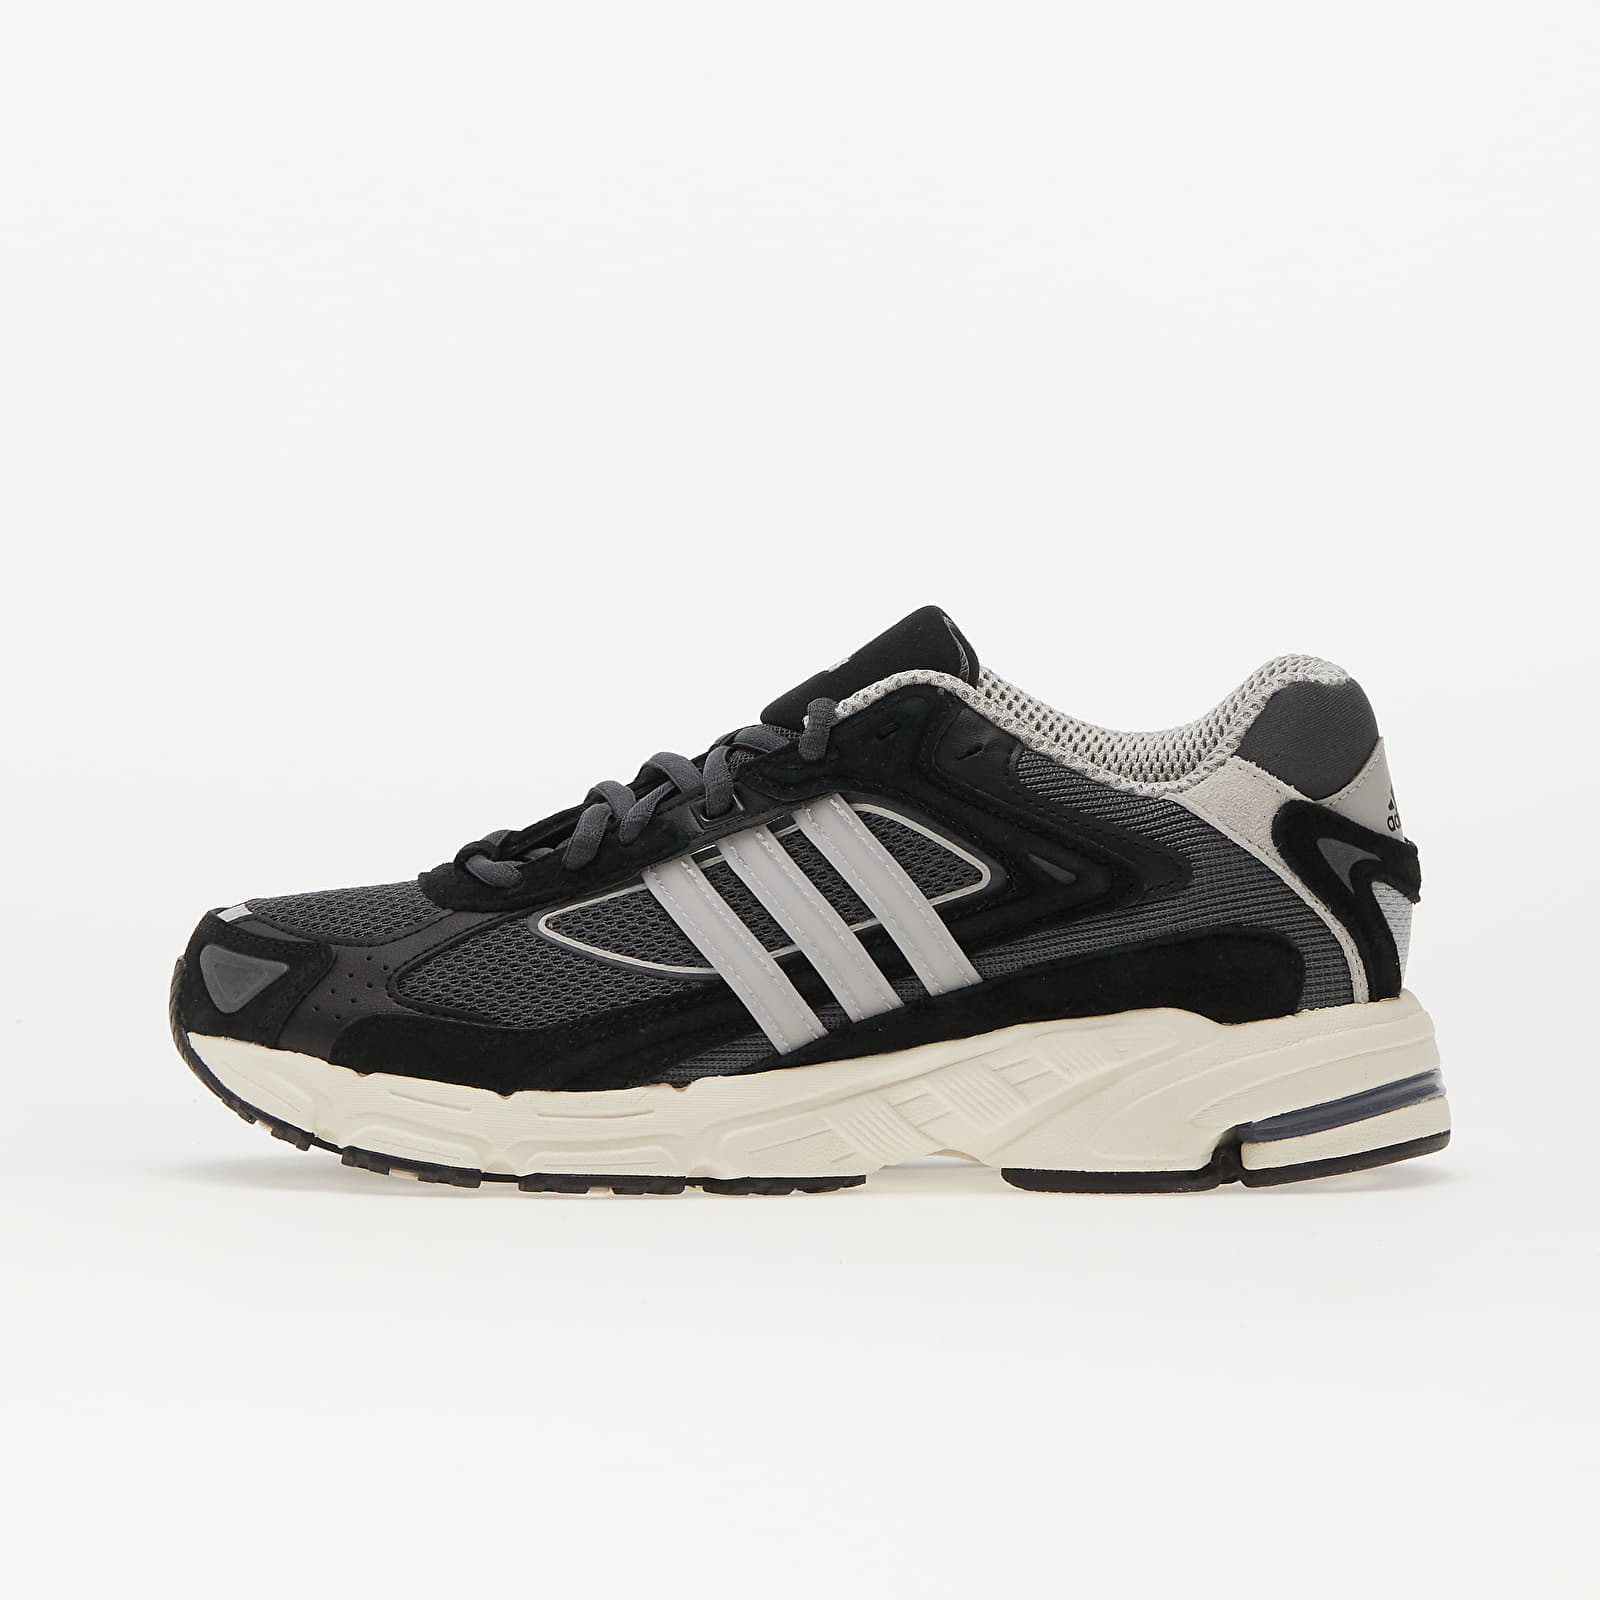 Chaussures et baskets homme adidas Response Cl Grey Six/ Grey Two/ Core Black